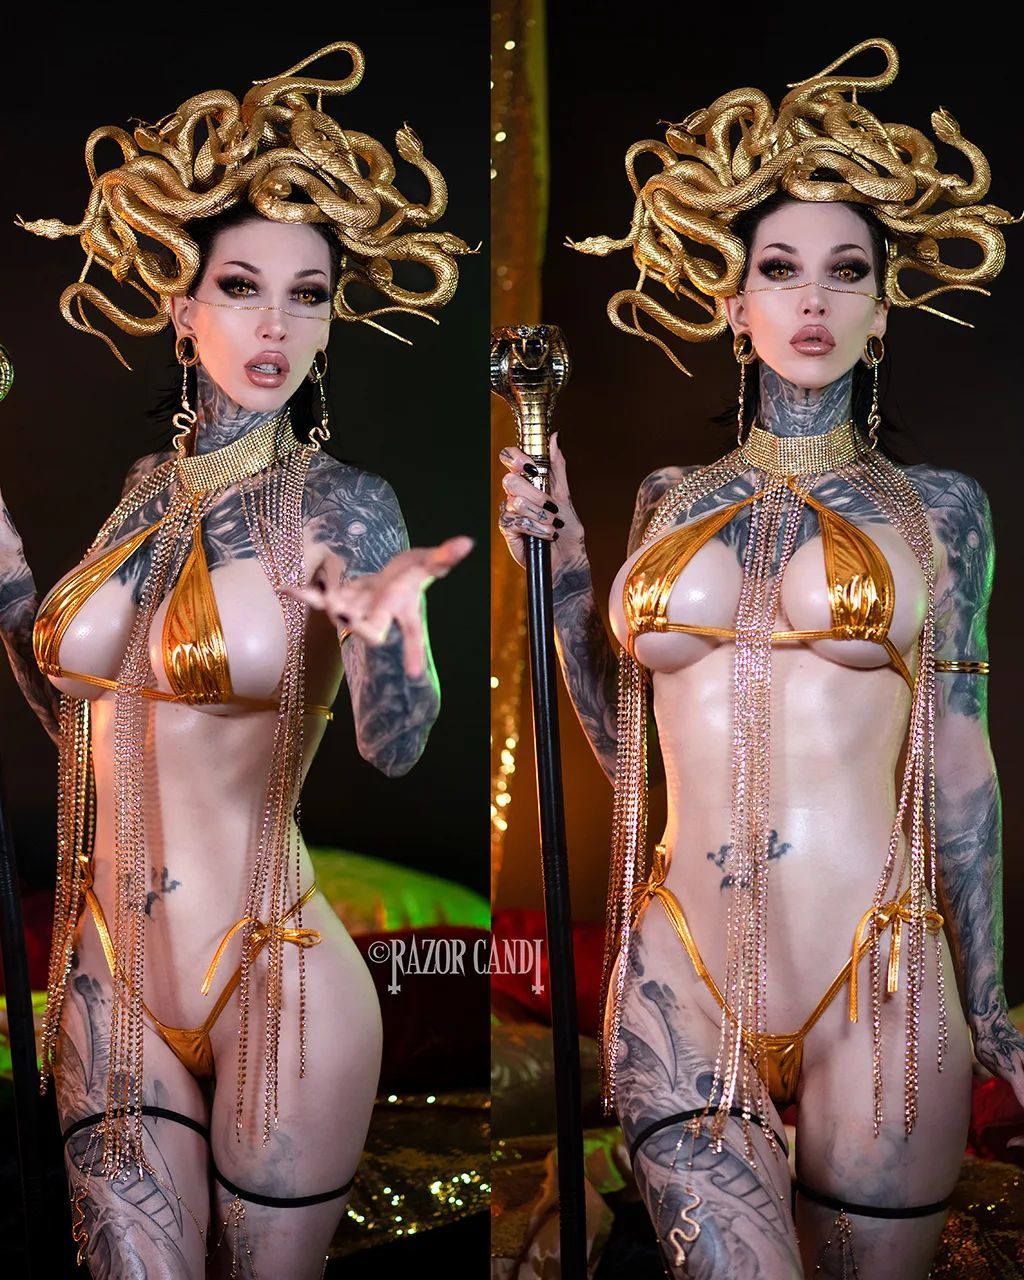 Razor Candi Naked - View ?Medusa by Razor_Candi for free | Simply-Cosplay